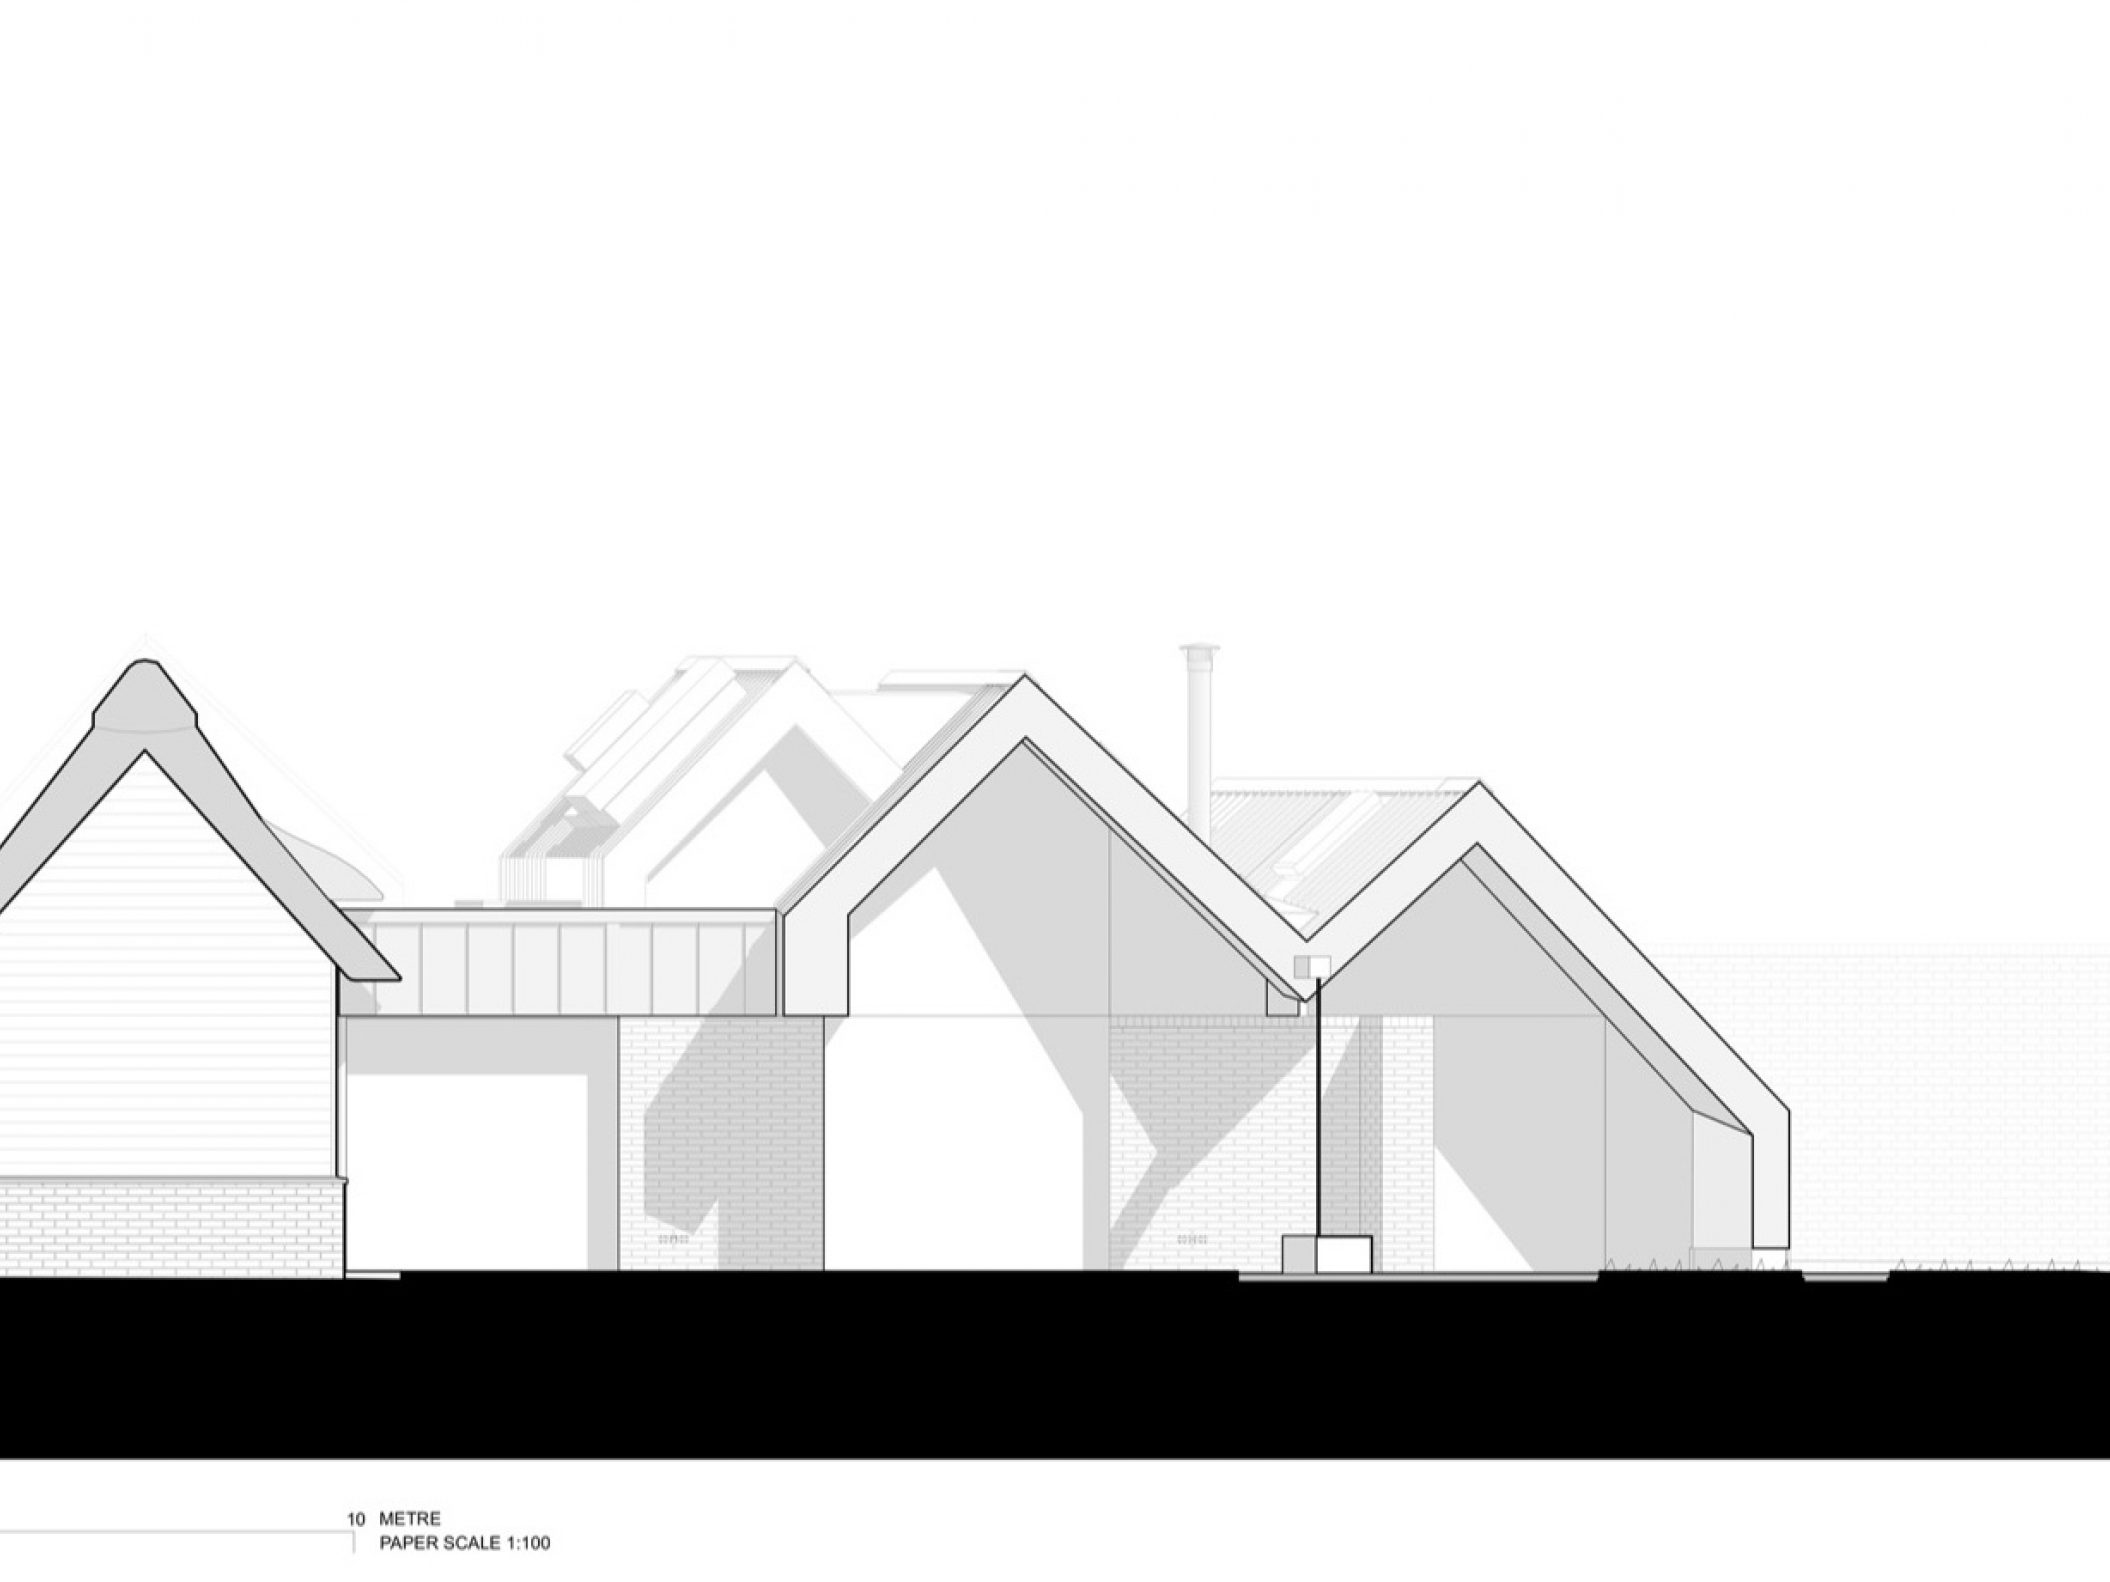 Architecture elevation drawing of pitched roof houses | cdc studio cambridge architects